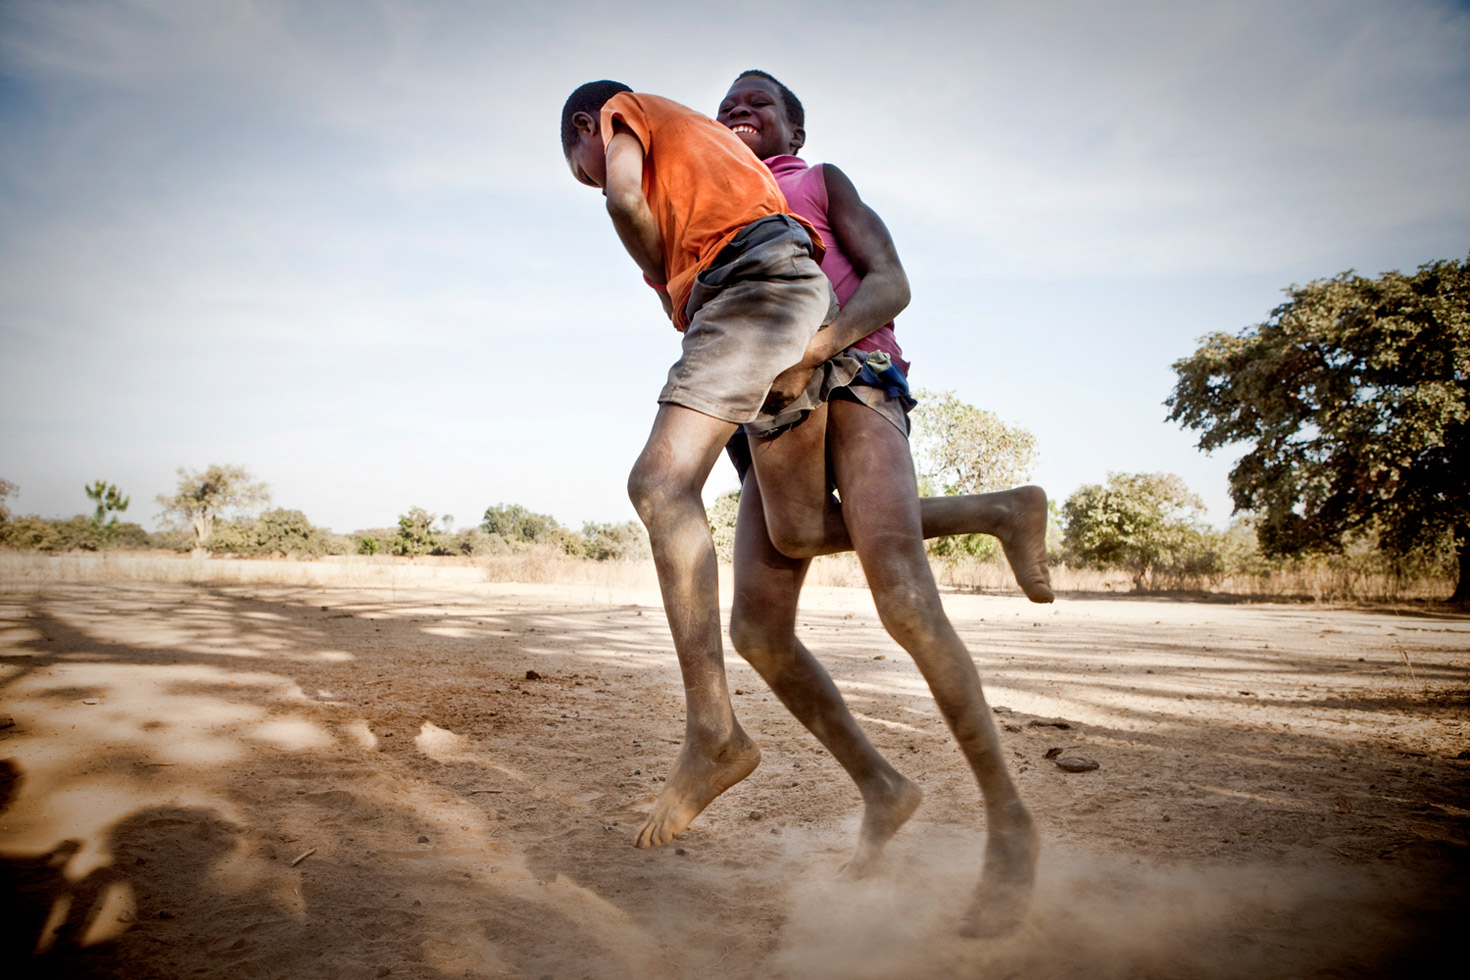 Young boys wrestling in a traditional Gambian style in the riverside village of Karantaba.